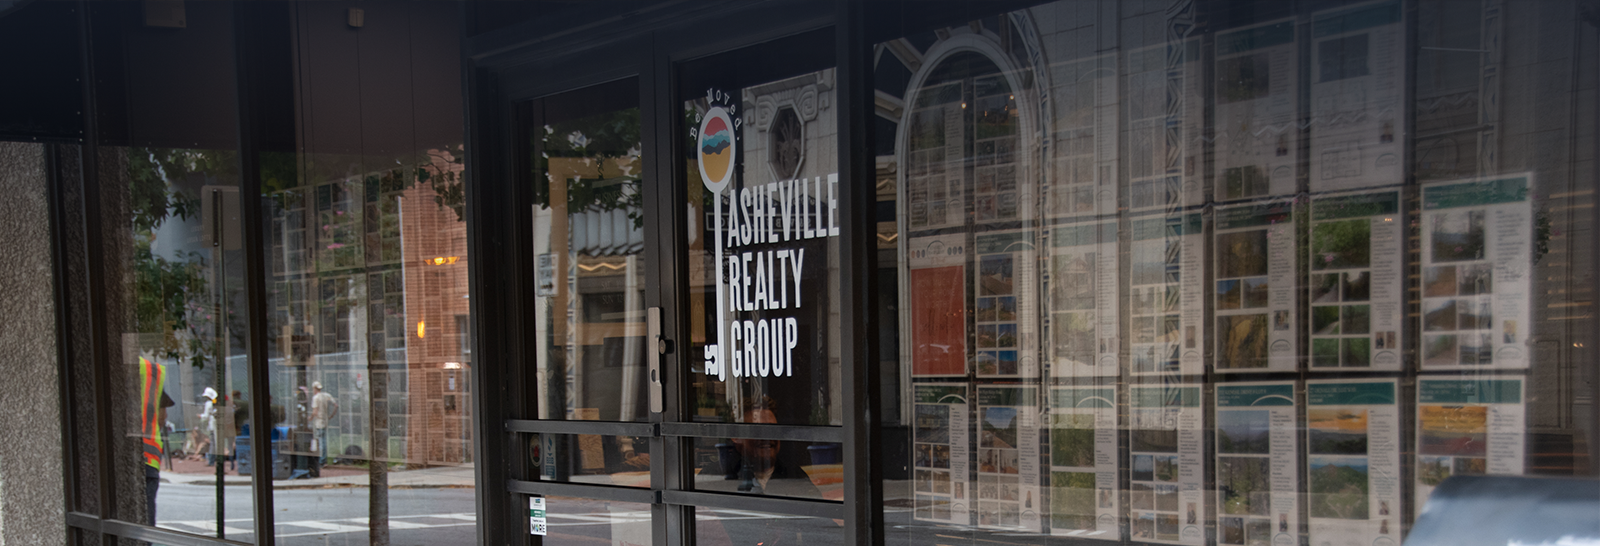 Contact • Asheville Realty Group • Luxury Homes For Sale